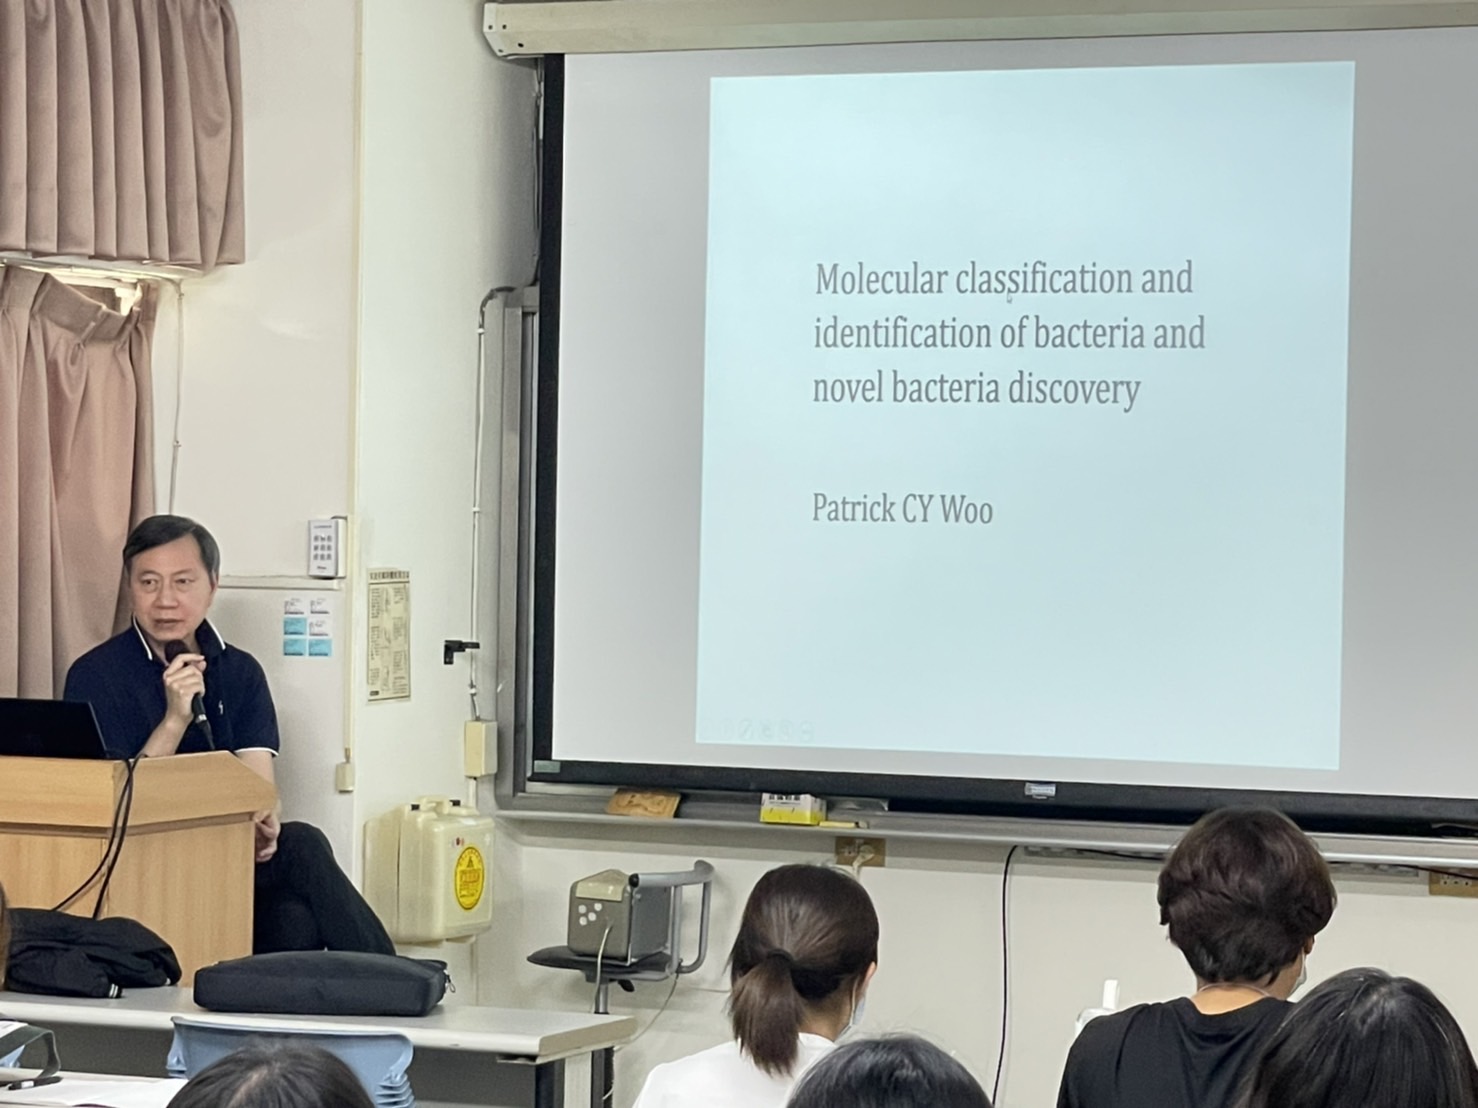 Molecular classification and identification of bacteria and novel bacteria discovery # Dr. Patrick CY WOO